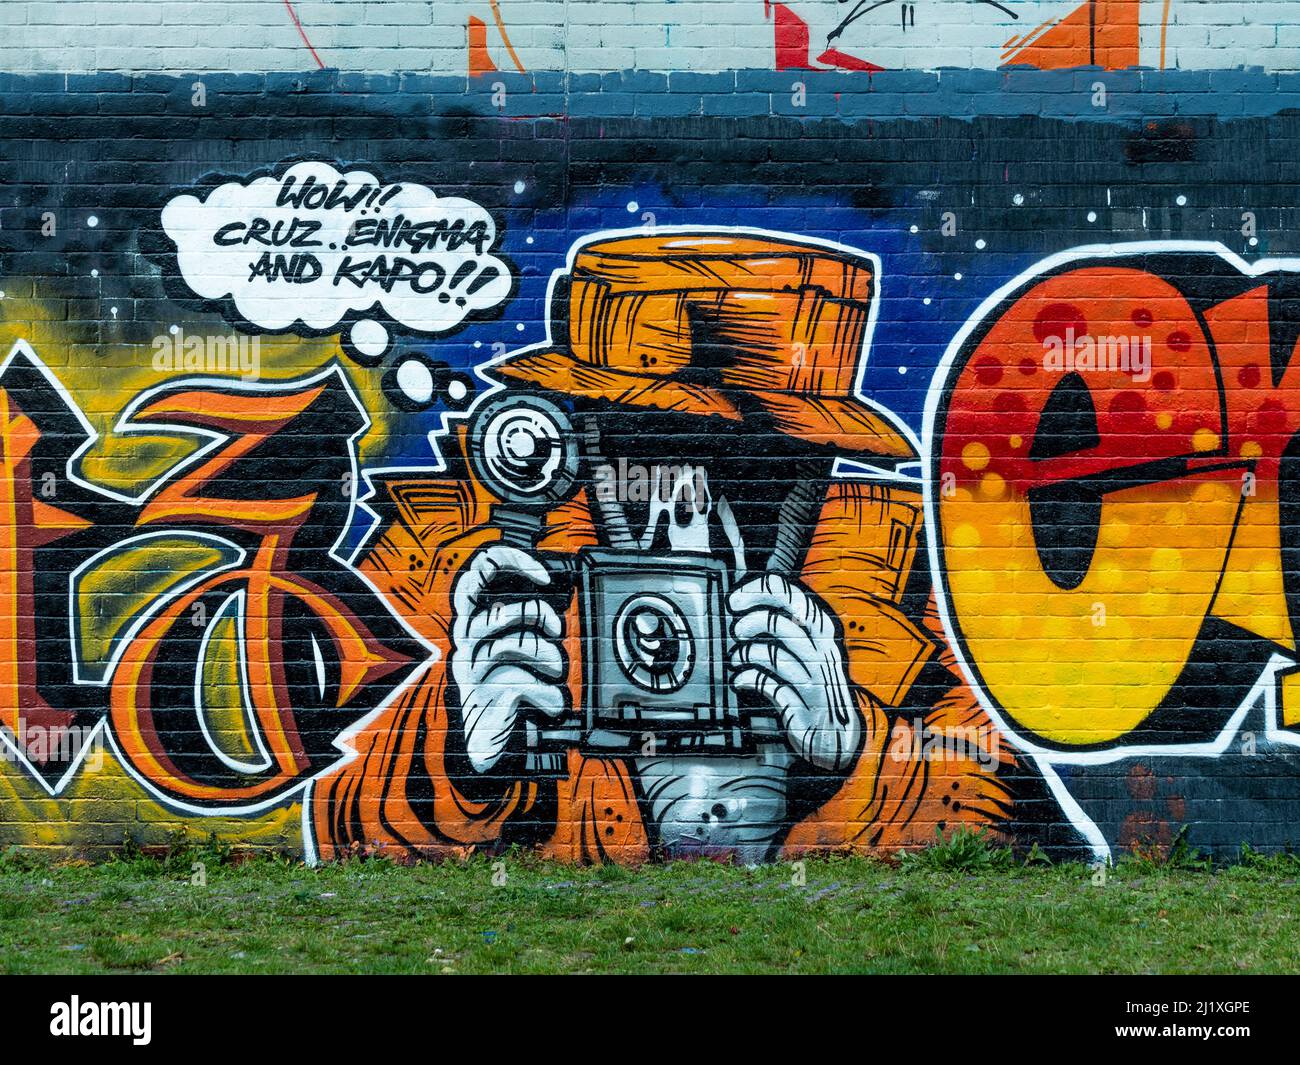 Colourful graffiti of a paparazzo on the railway walls seen from Station Park, Spitalfields, London. Stock Photo